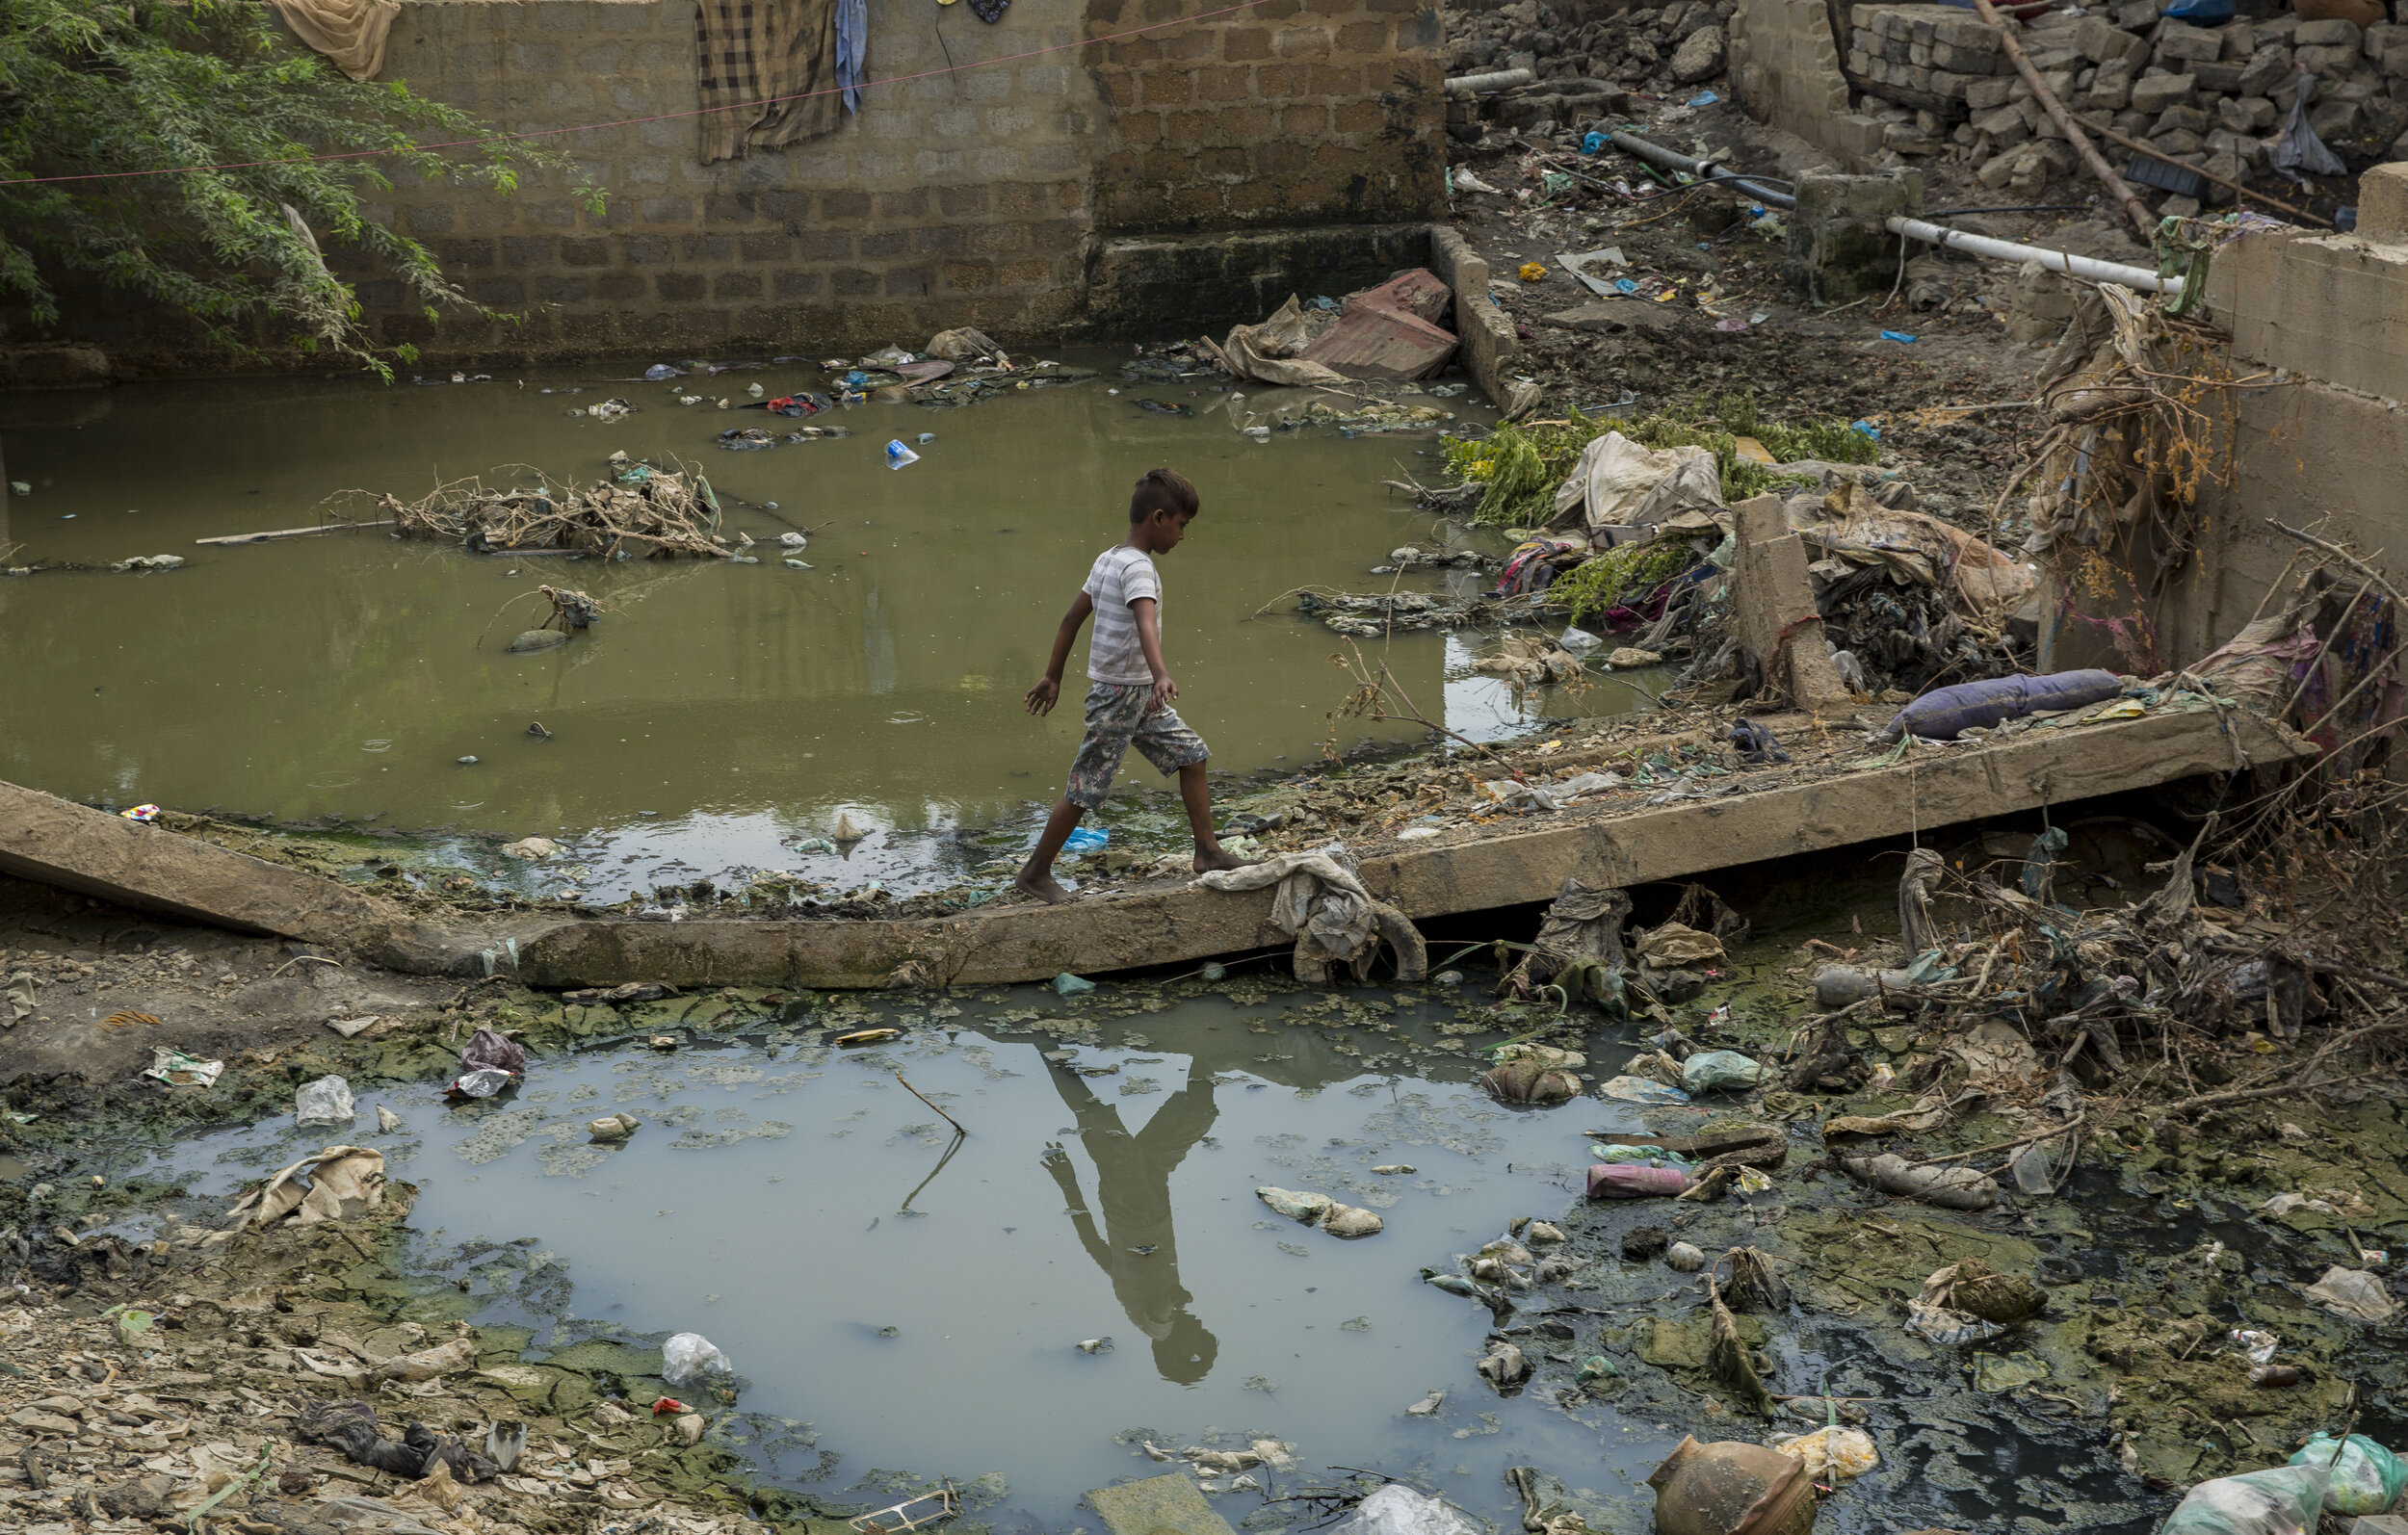  A young boy passes by flood water to go home in one of the slum areas affected by the monsoon floods. 